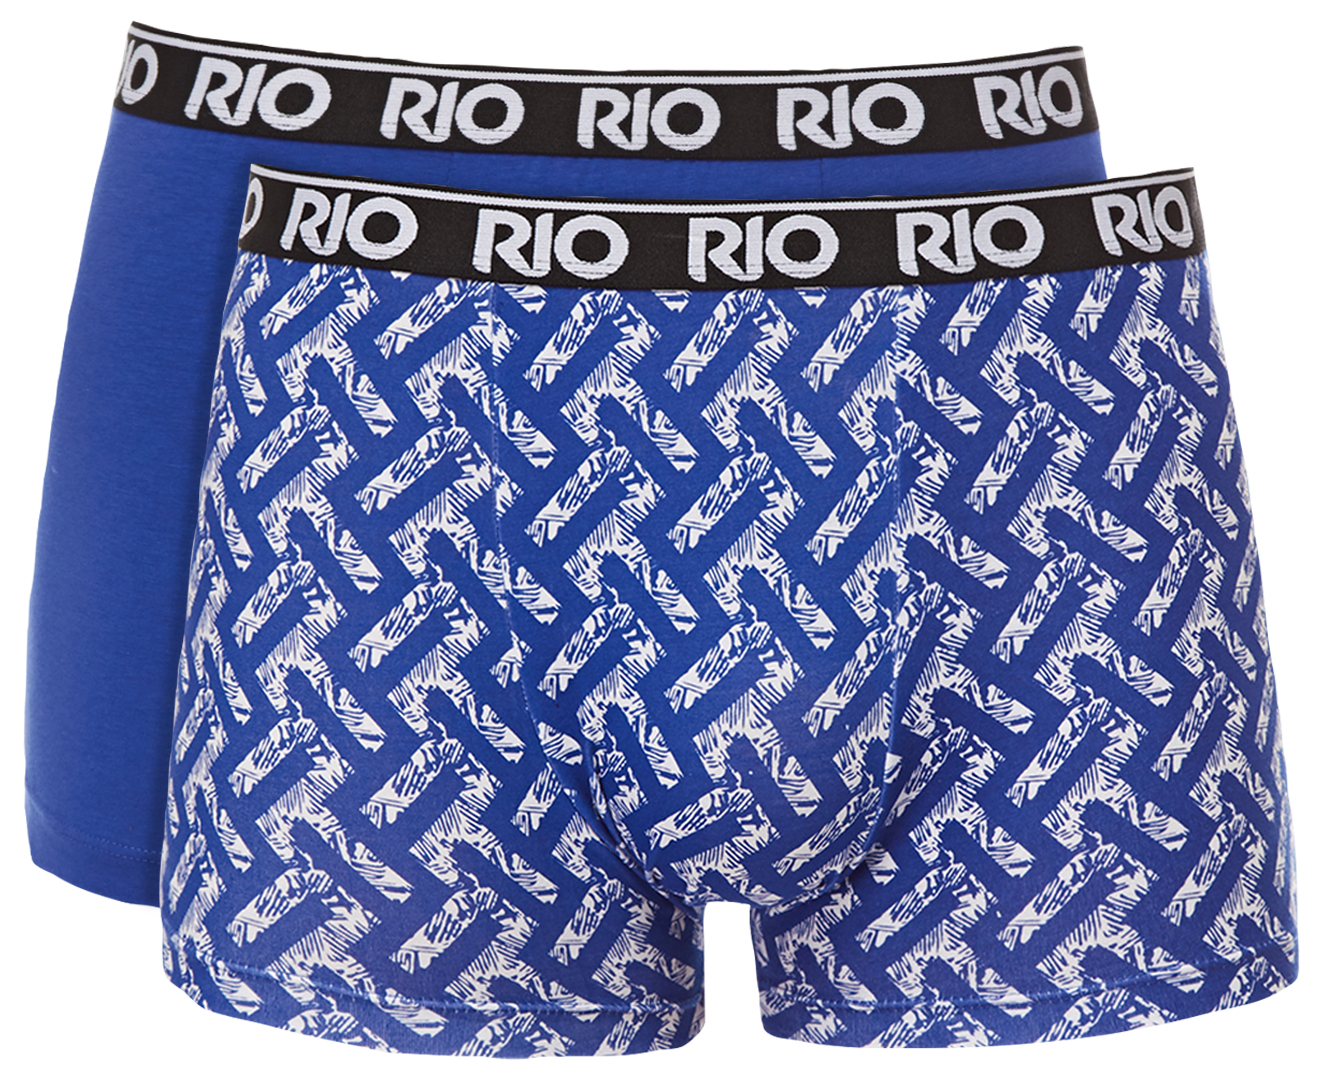 Rio Men's Hipster Trunk 2-Pack - Blue/White | Catch.co.nz